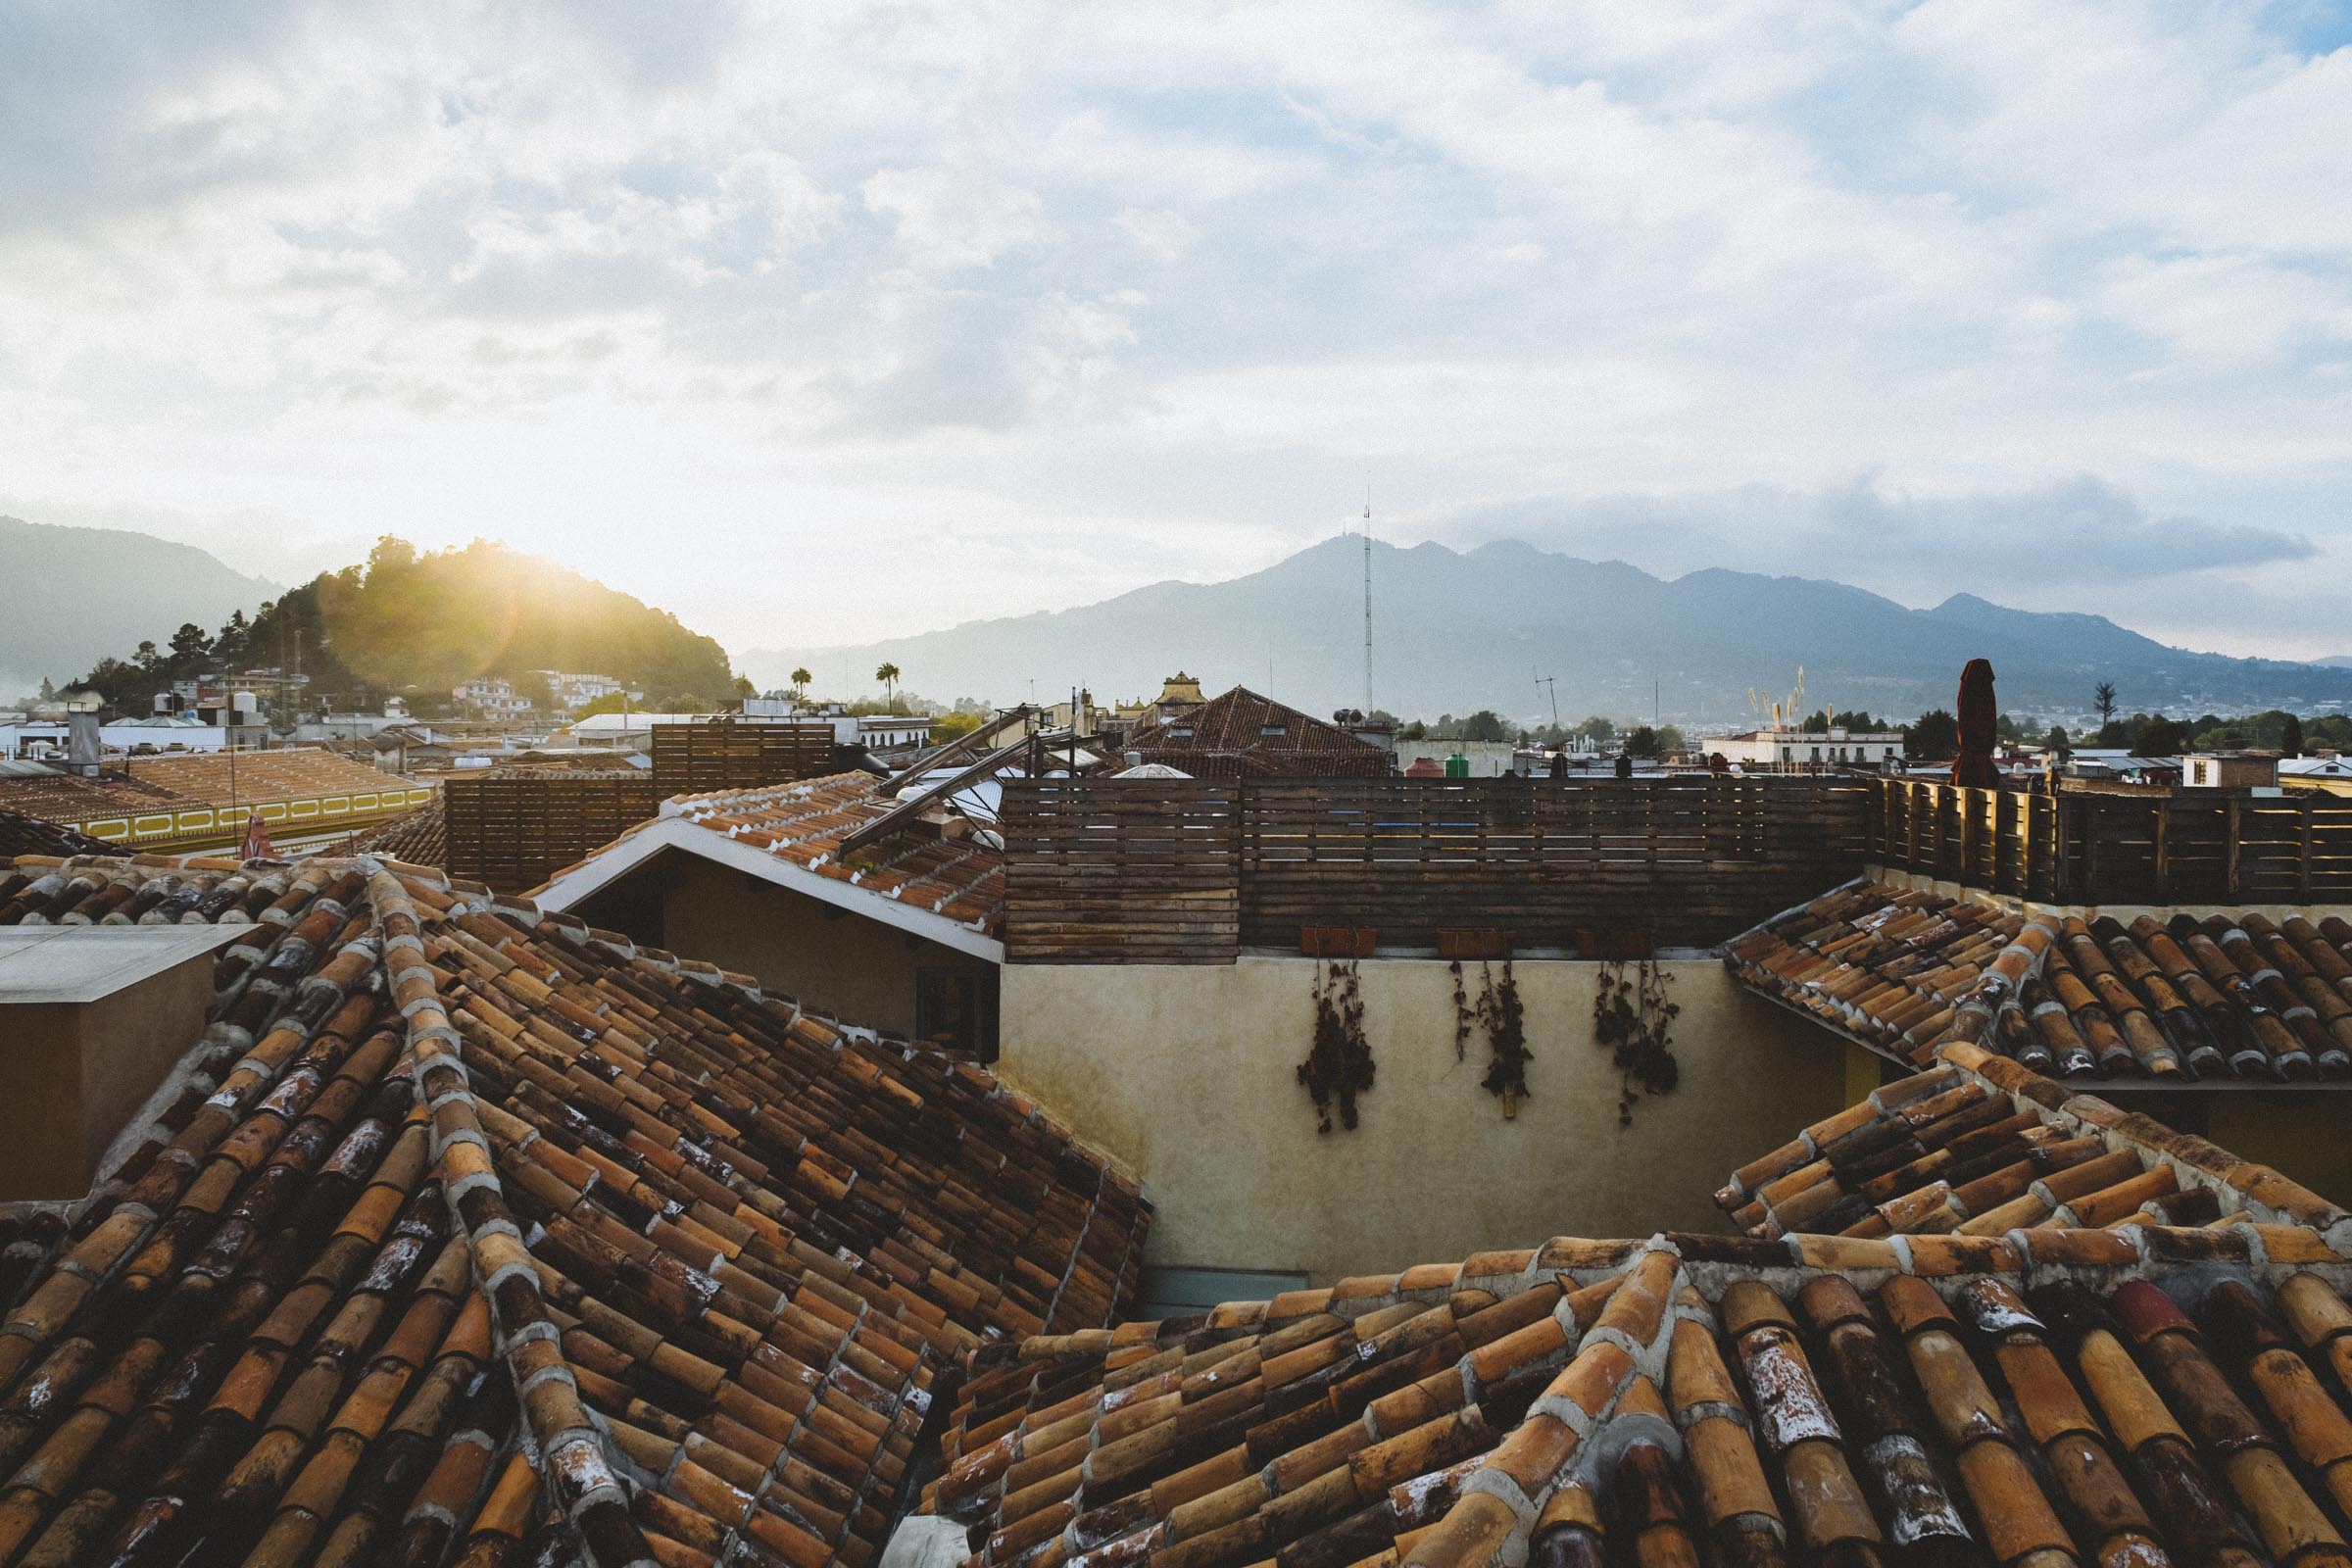 The rooftops of San Cristobal